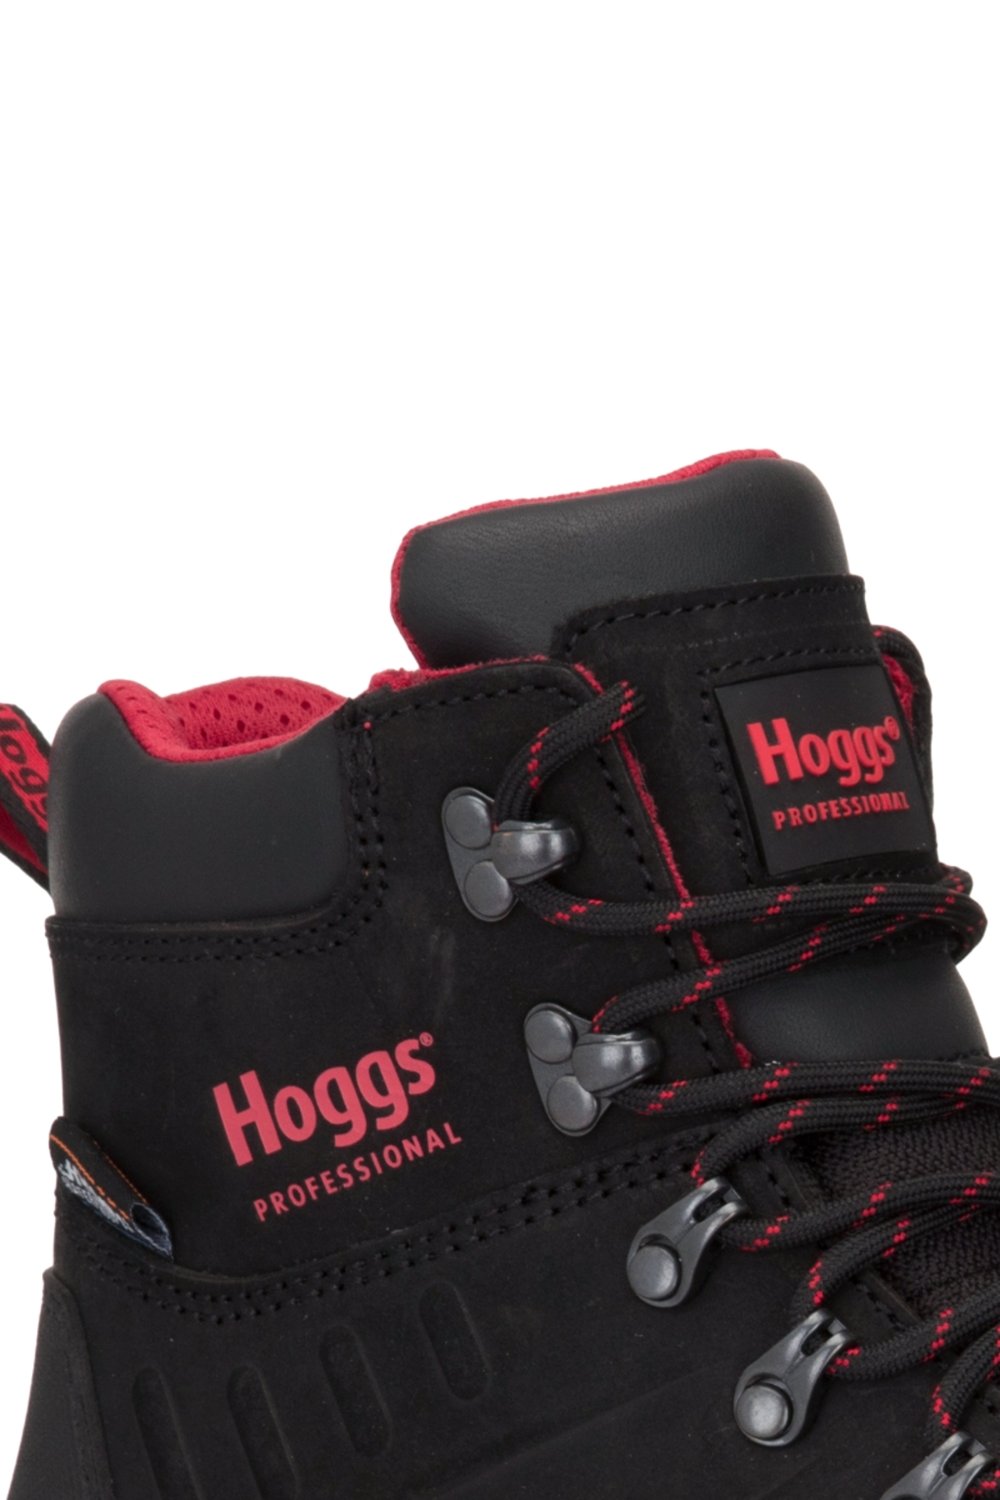 Hoggs of Fife Poseidon S3 Safety Lace-Up Boot in Black Nubuck 